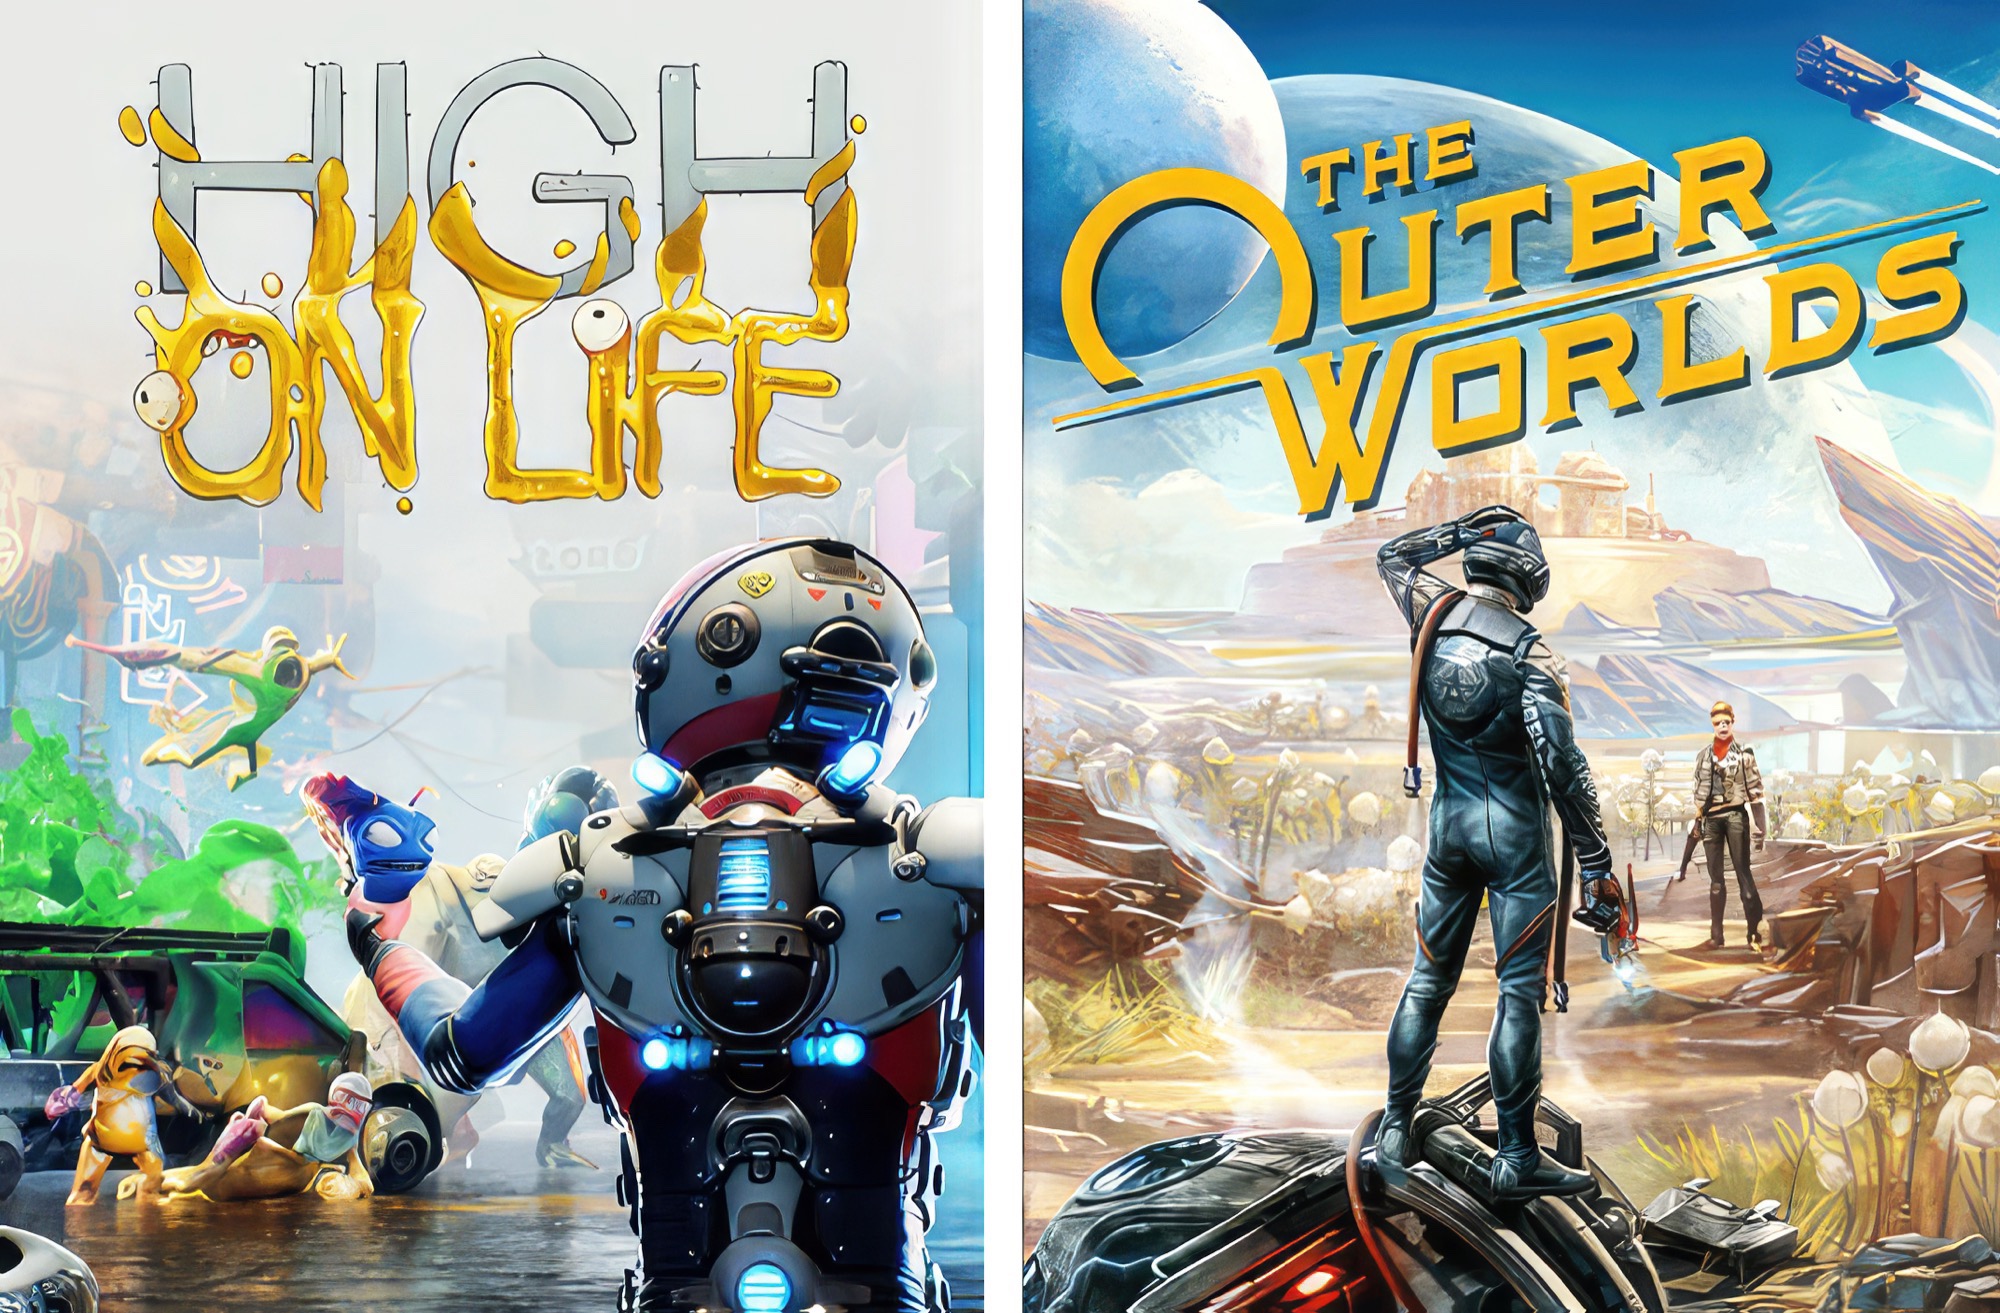 High on Life Headlines Humble's Space-Themed Bundle - Steam Deck HQ